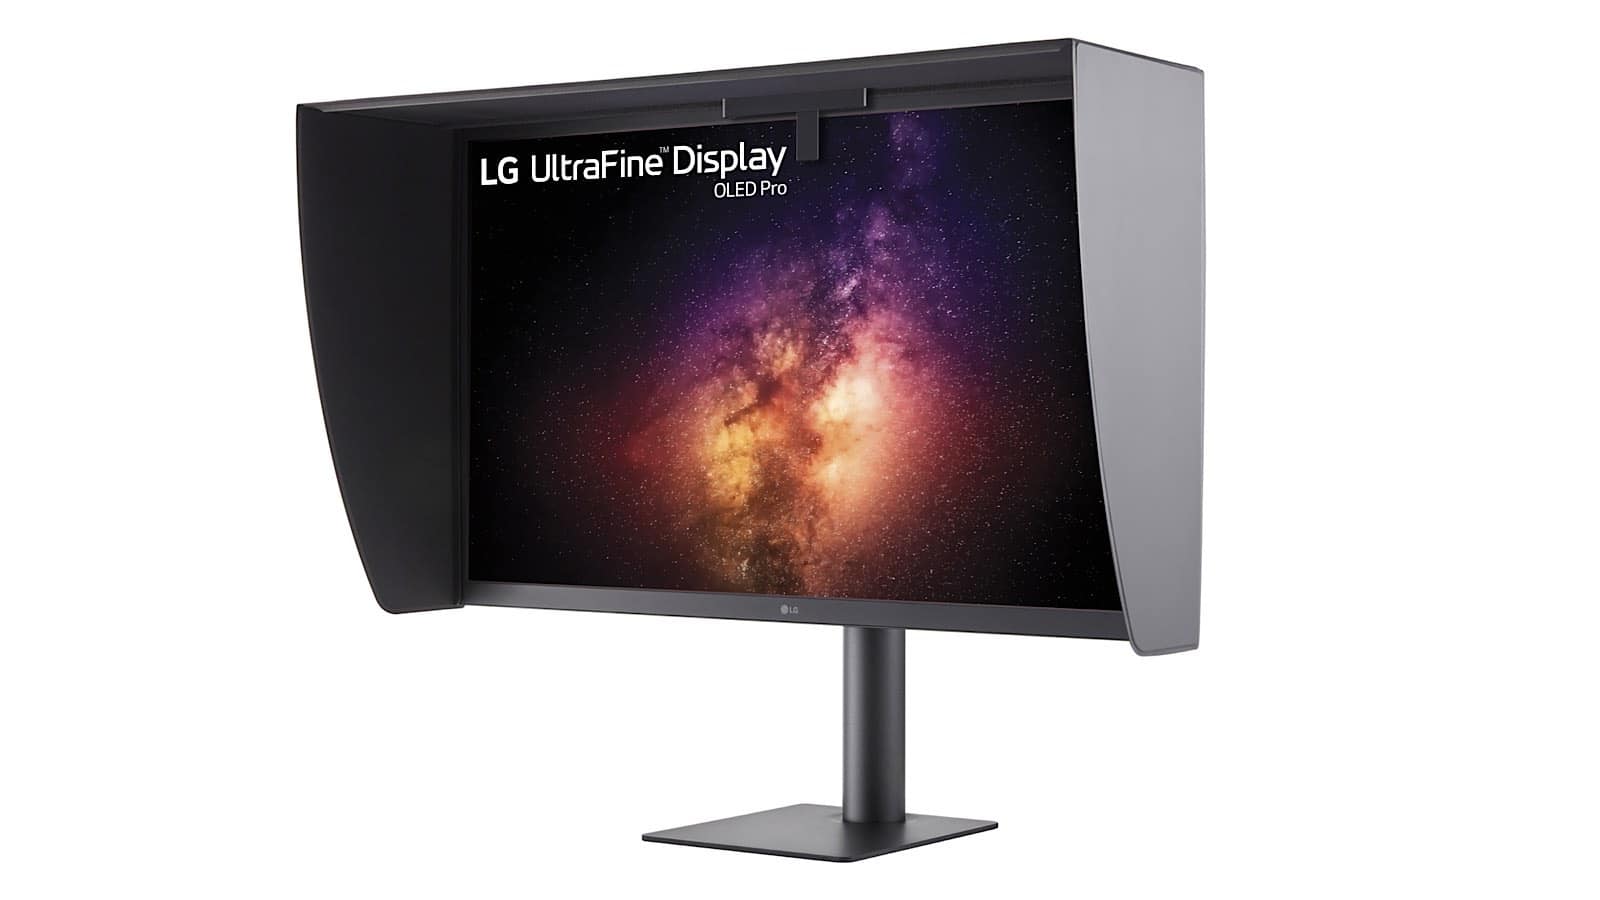 LG UltraFine OLED Pro screens launching at CES 2022